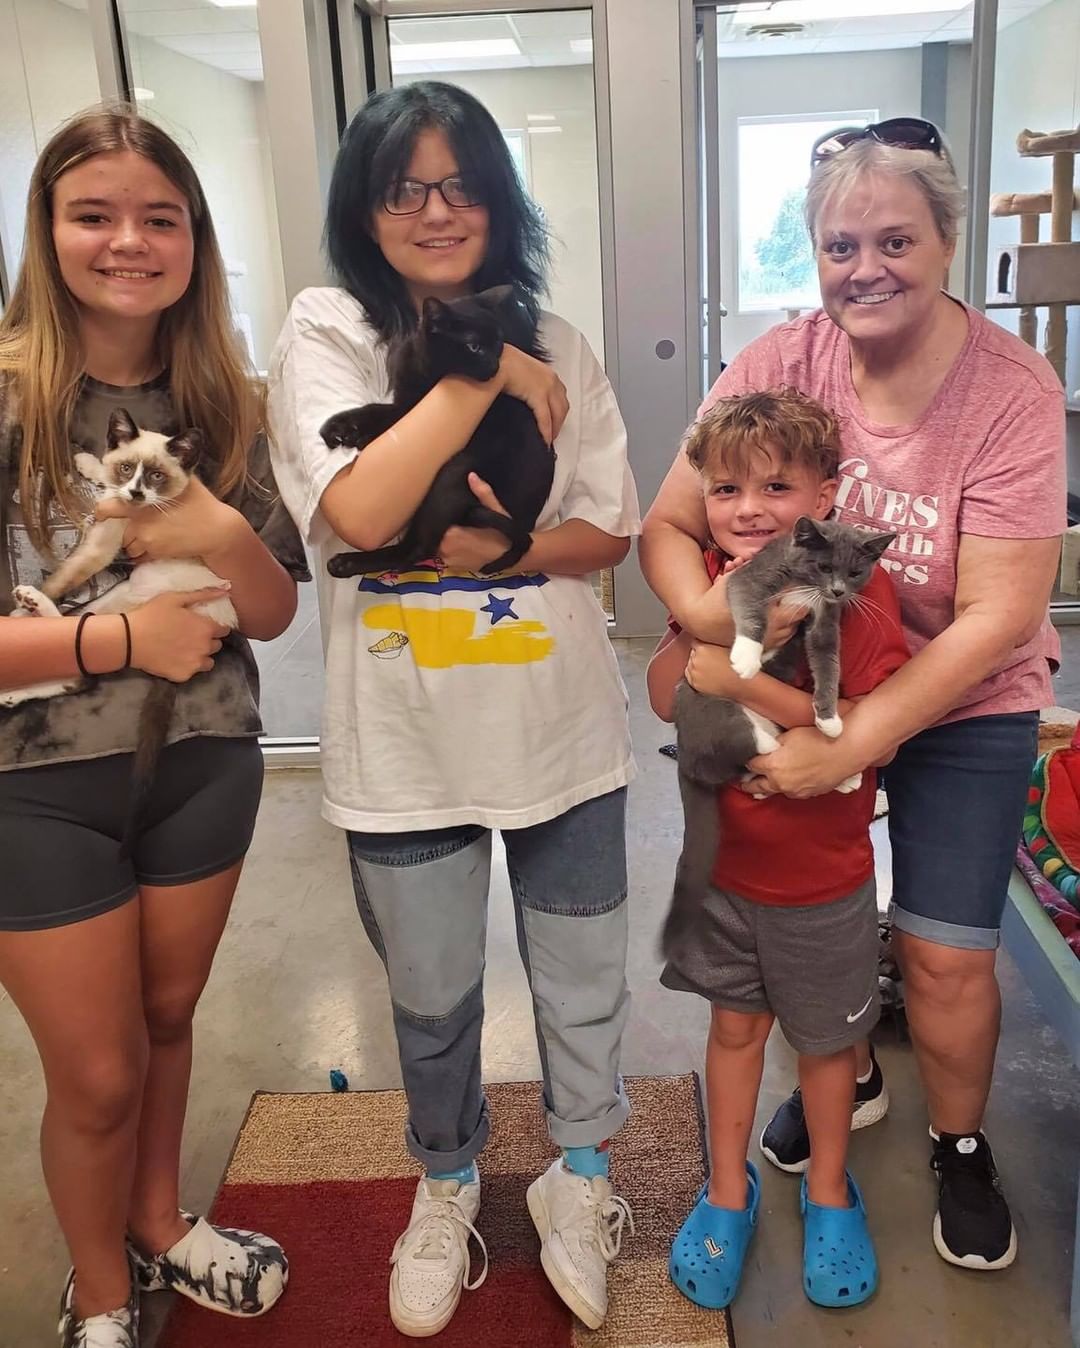 We are so thankful for our recent kitten adoptions! Love & kisses to our kittens in their new forever homes ❤️🐈‍⬛